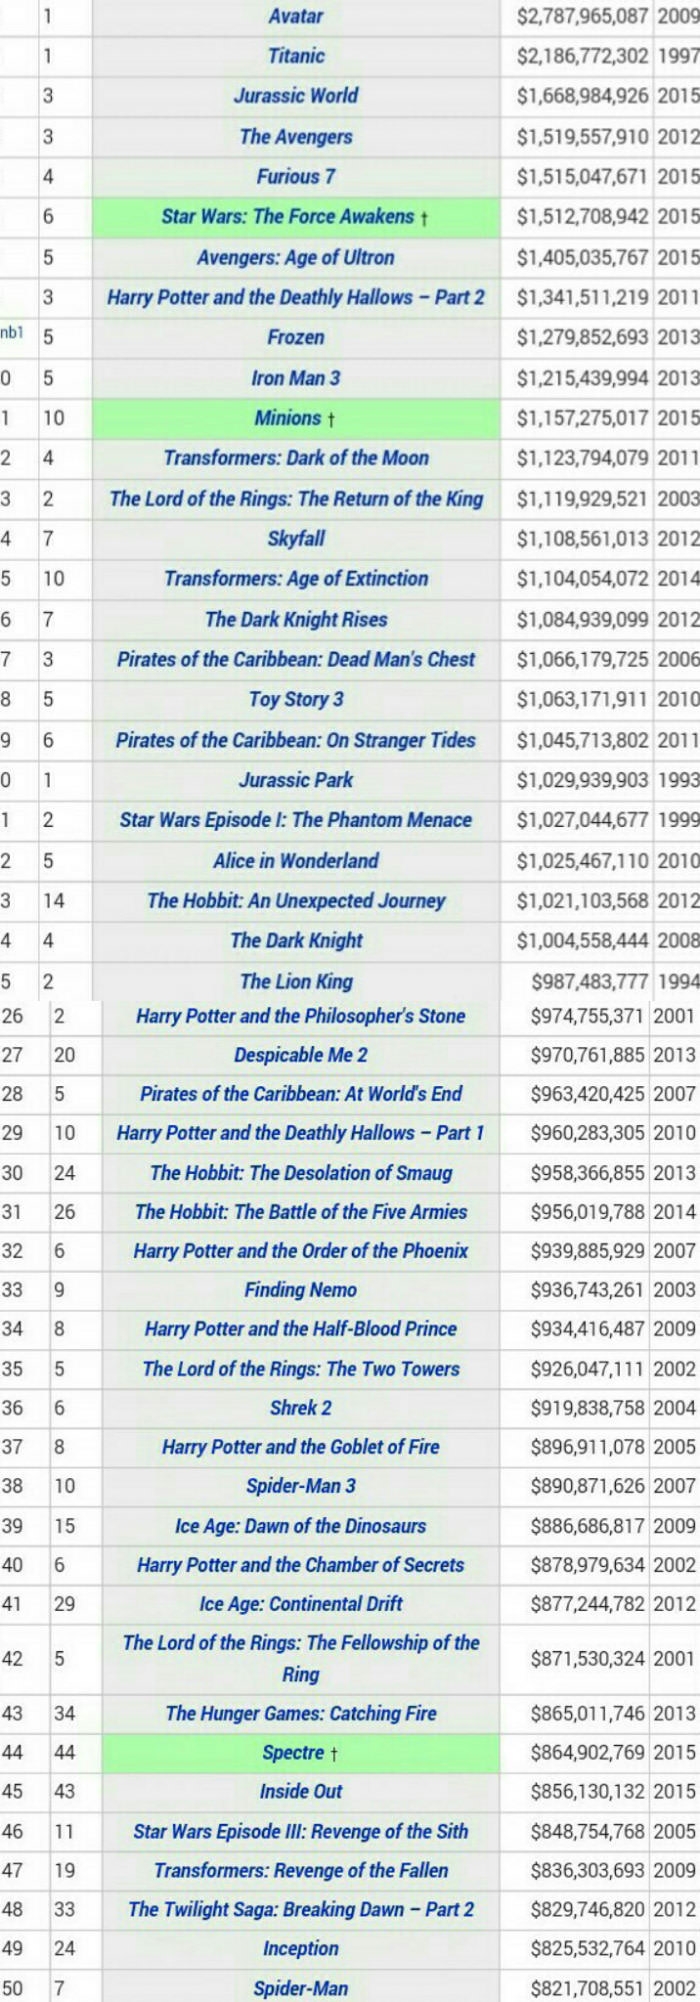 Top Highest Grossing Movies Of All Time 0 Hot Sex Picture